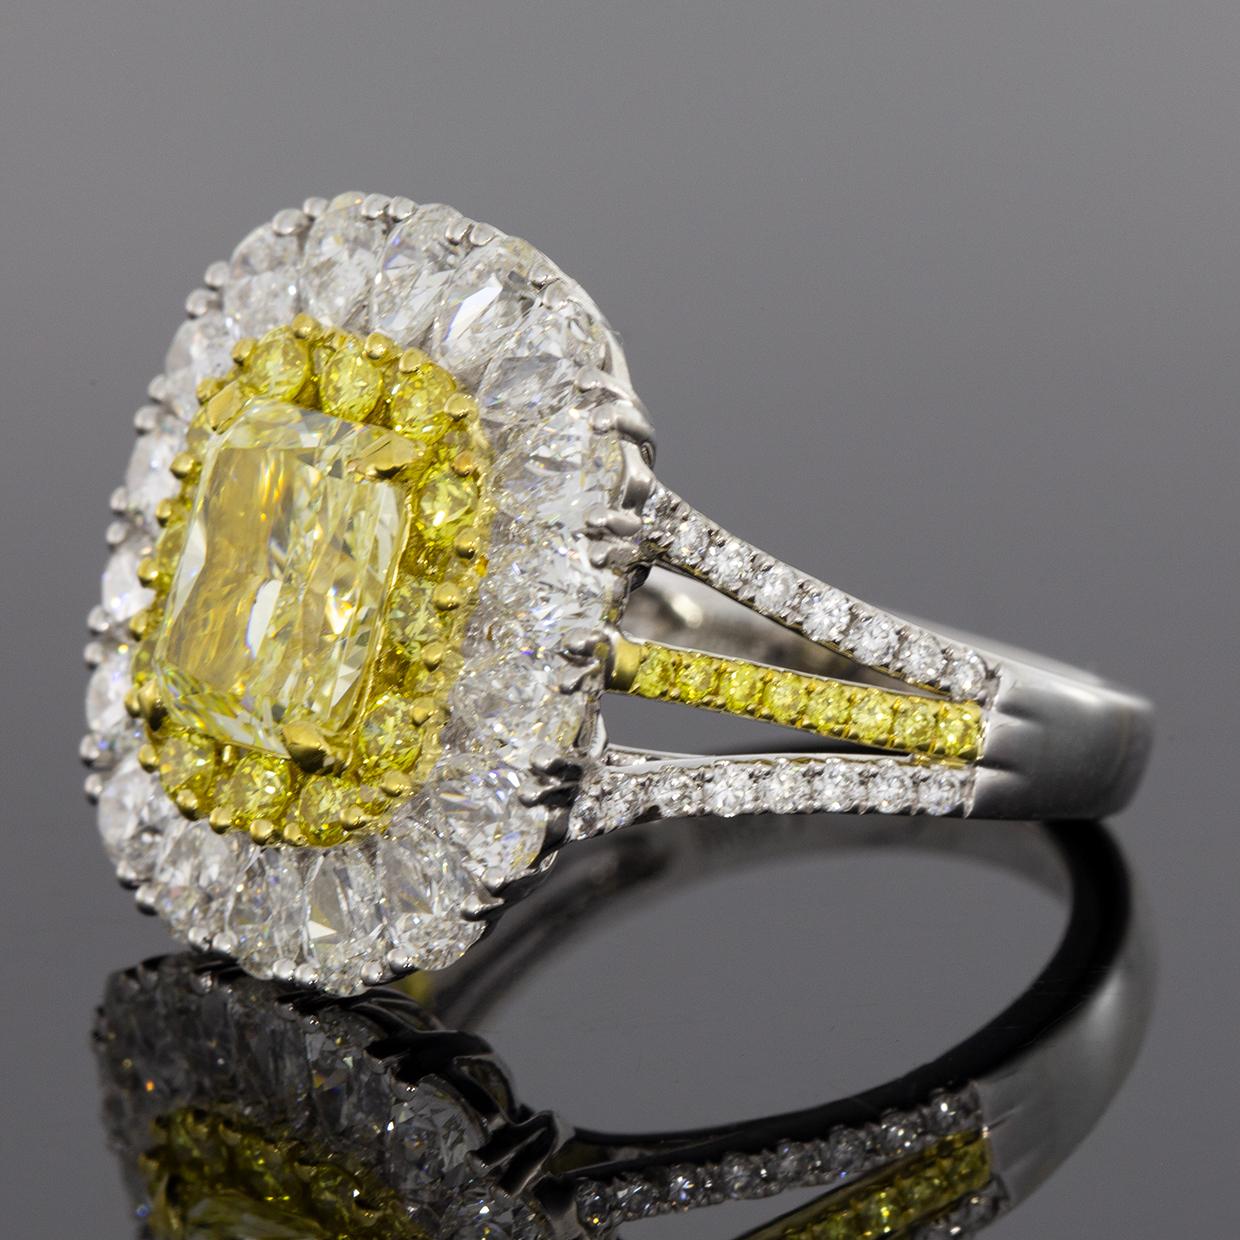 Radiant Cut 4.92 Carat GIA Certified Fancy Light Yellow Radiant Diamond Halo Engagement Ring